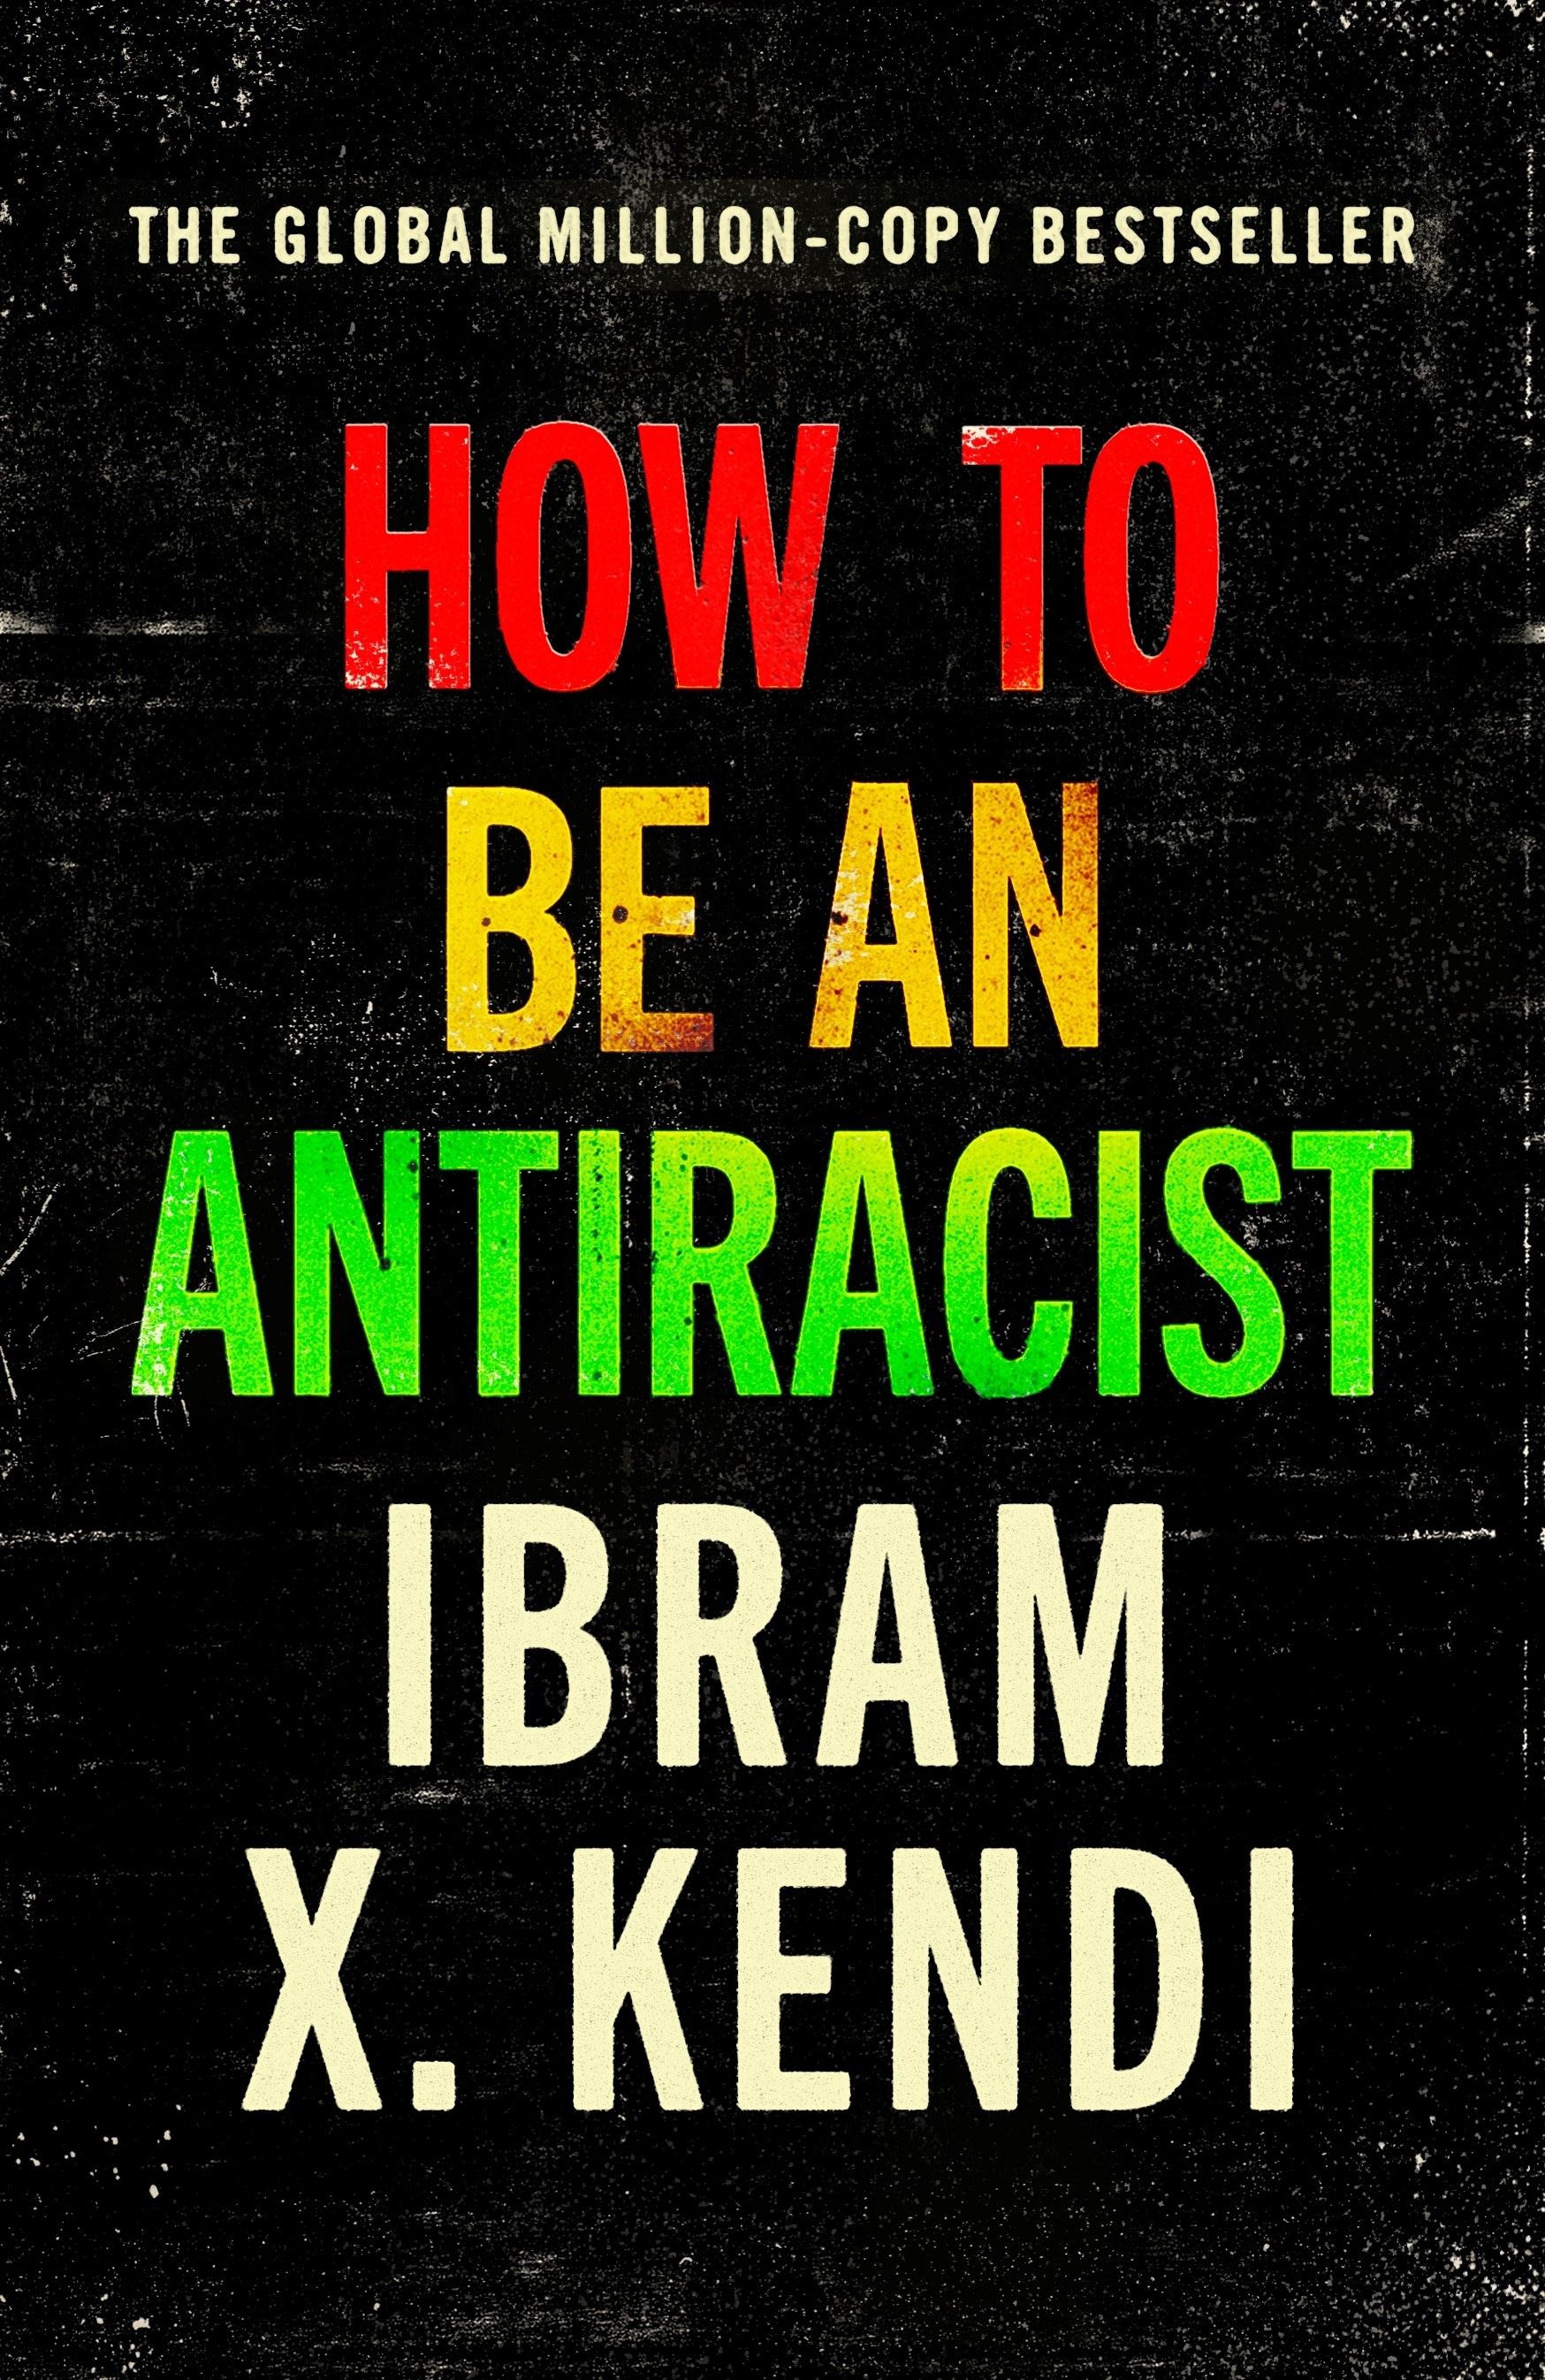 Book “How To Be an Antiracist” by Ibram X. Kendi — January 5, 2023